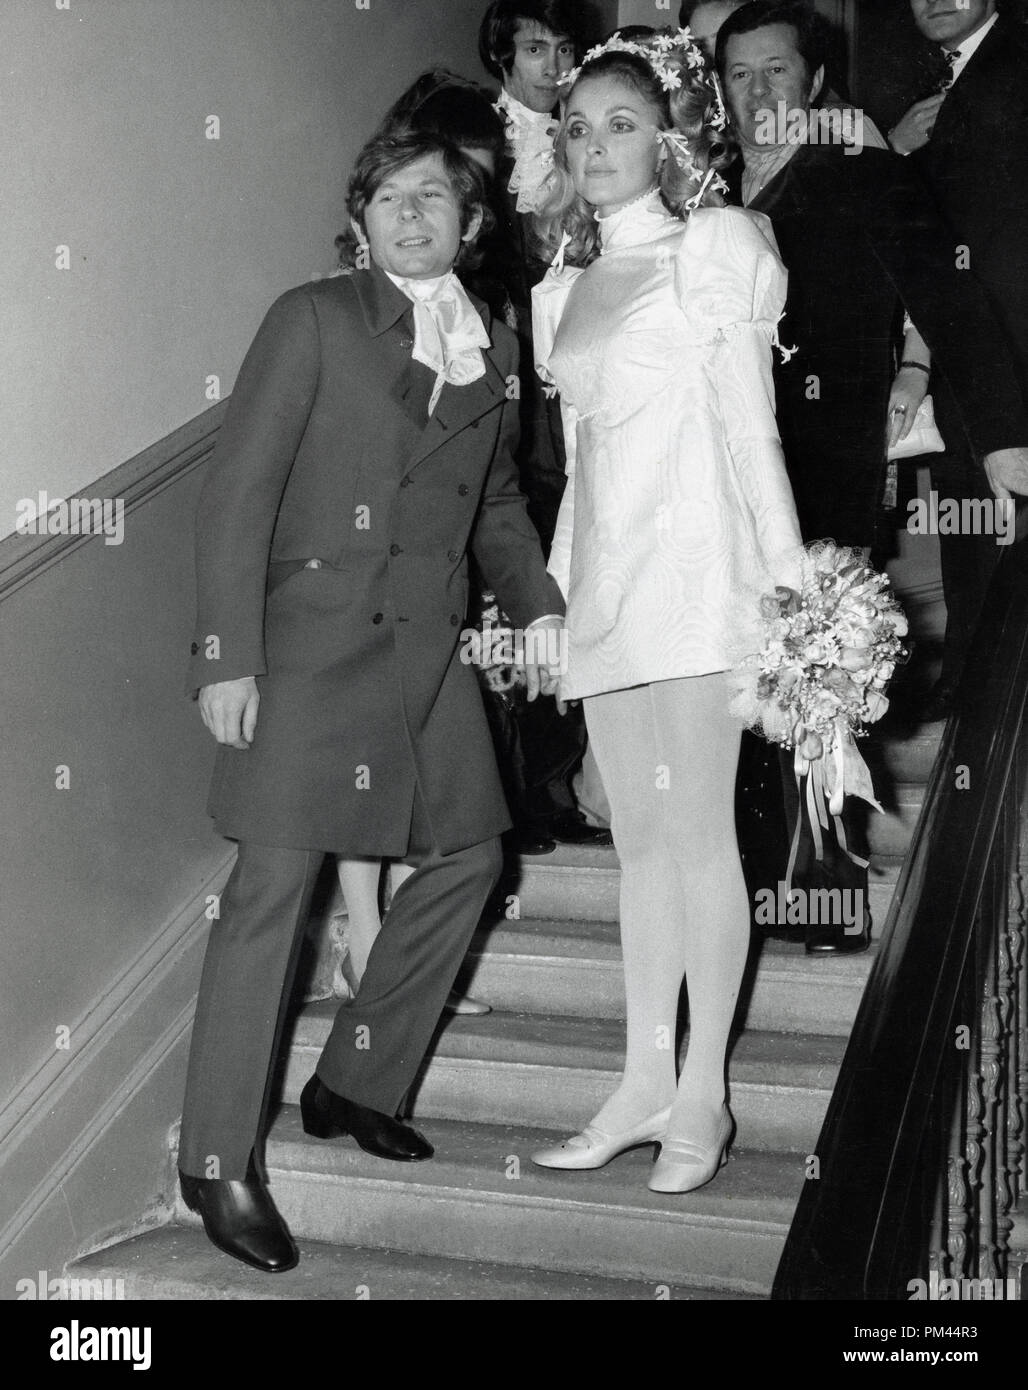 Sharon Tate and Roman Polanski on their wedding day, January 20,1968. File  Reference #1027 006THA © JRC /The Hollywood Archive - All Rights Reserved  Stock Photo - Alamy